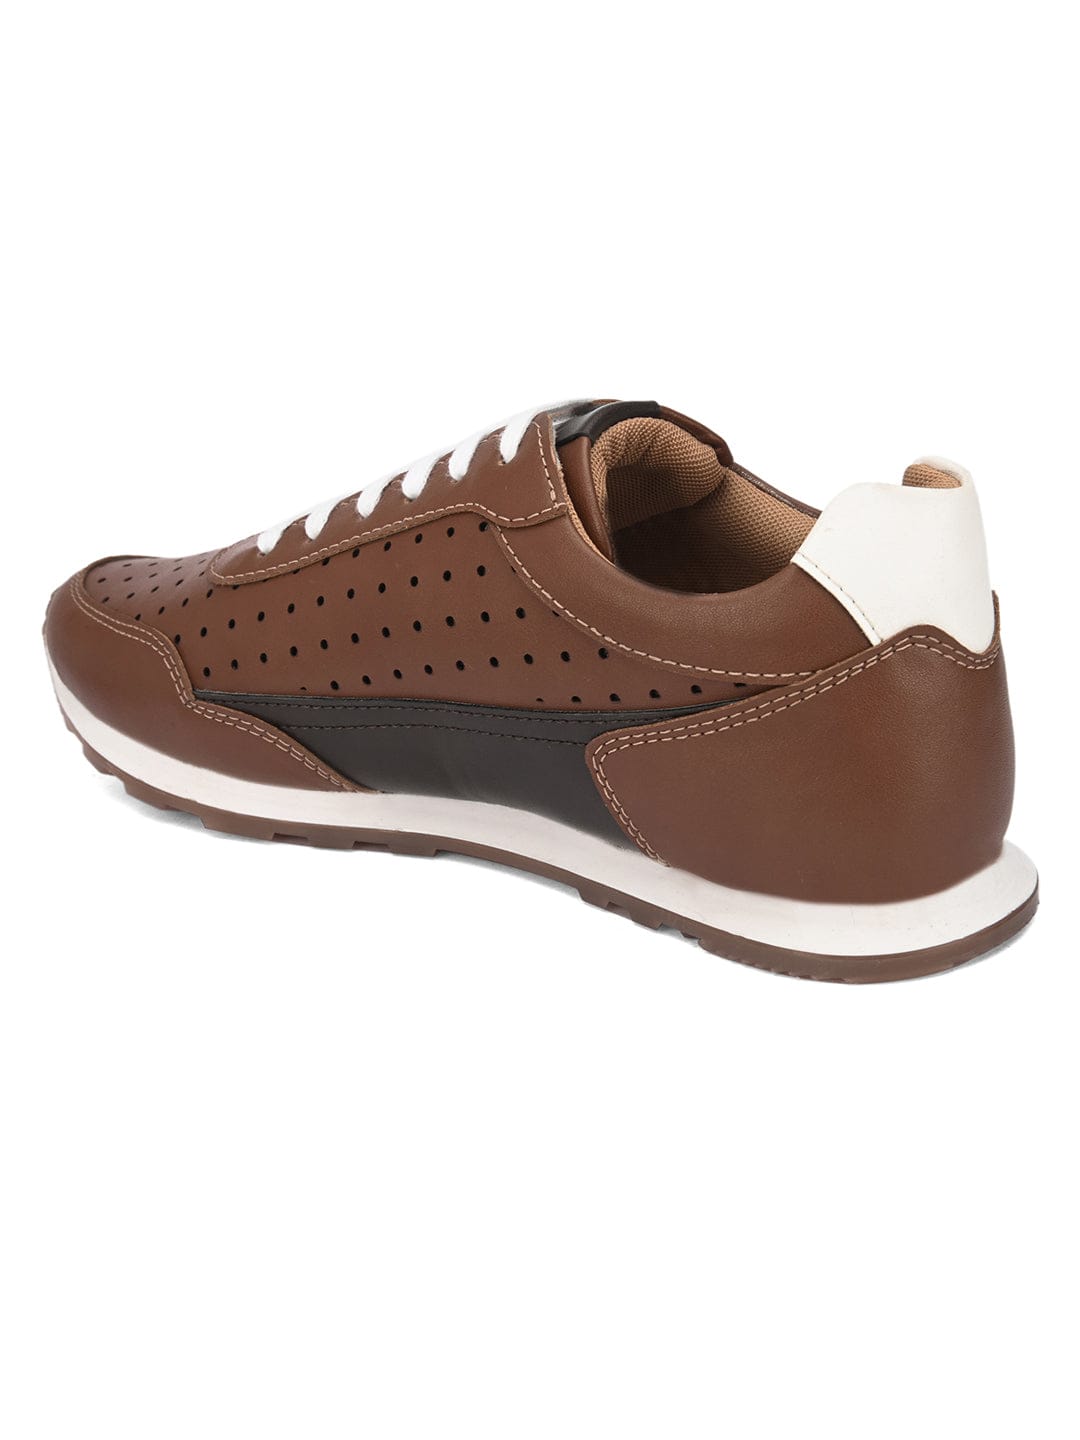 ESMEE Lace Up Casual Sporty Look Shoes